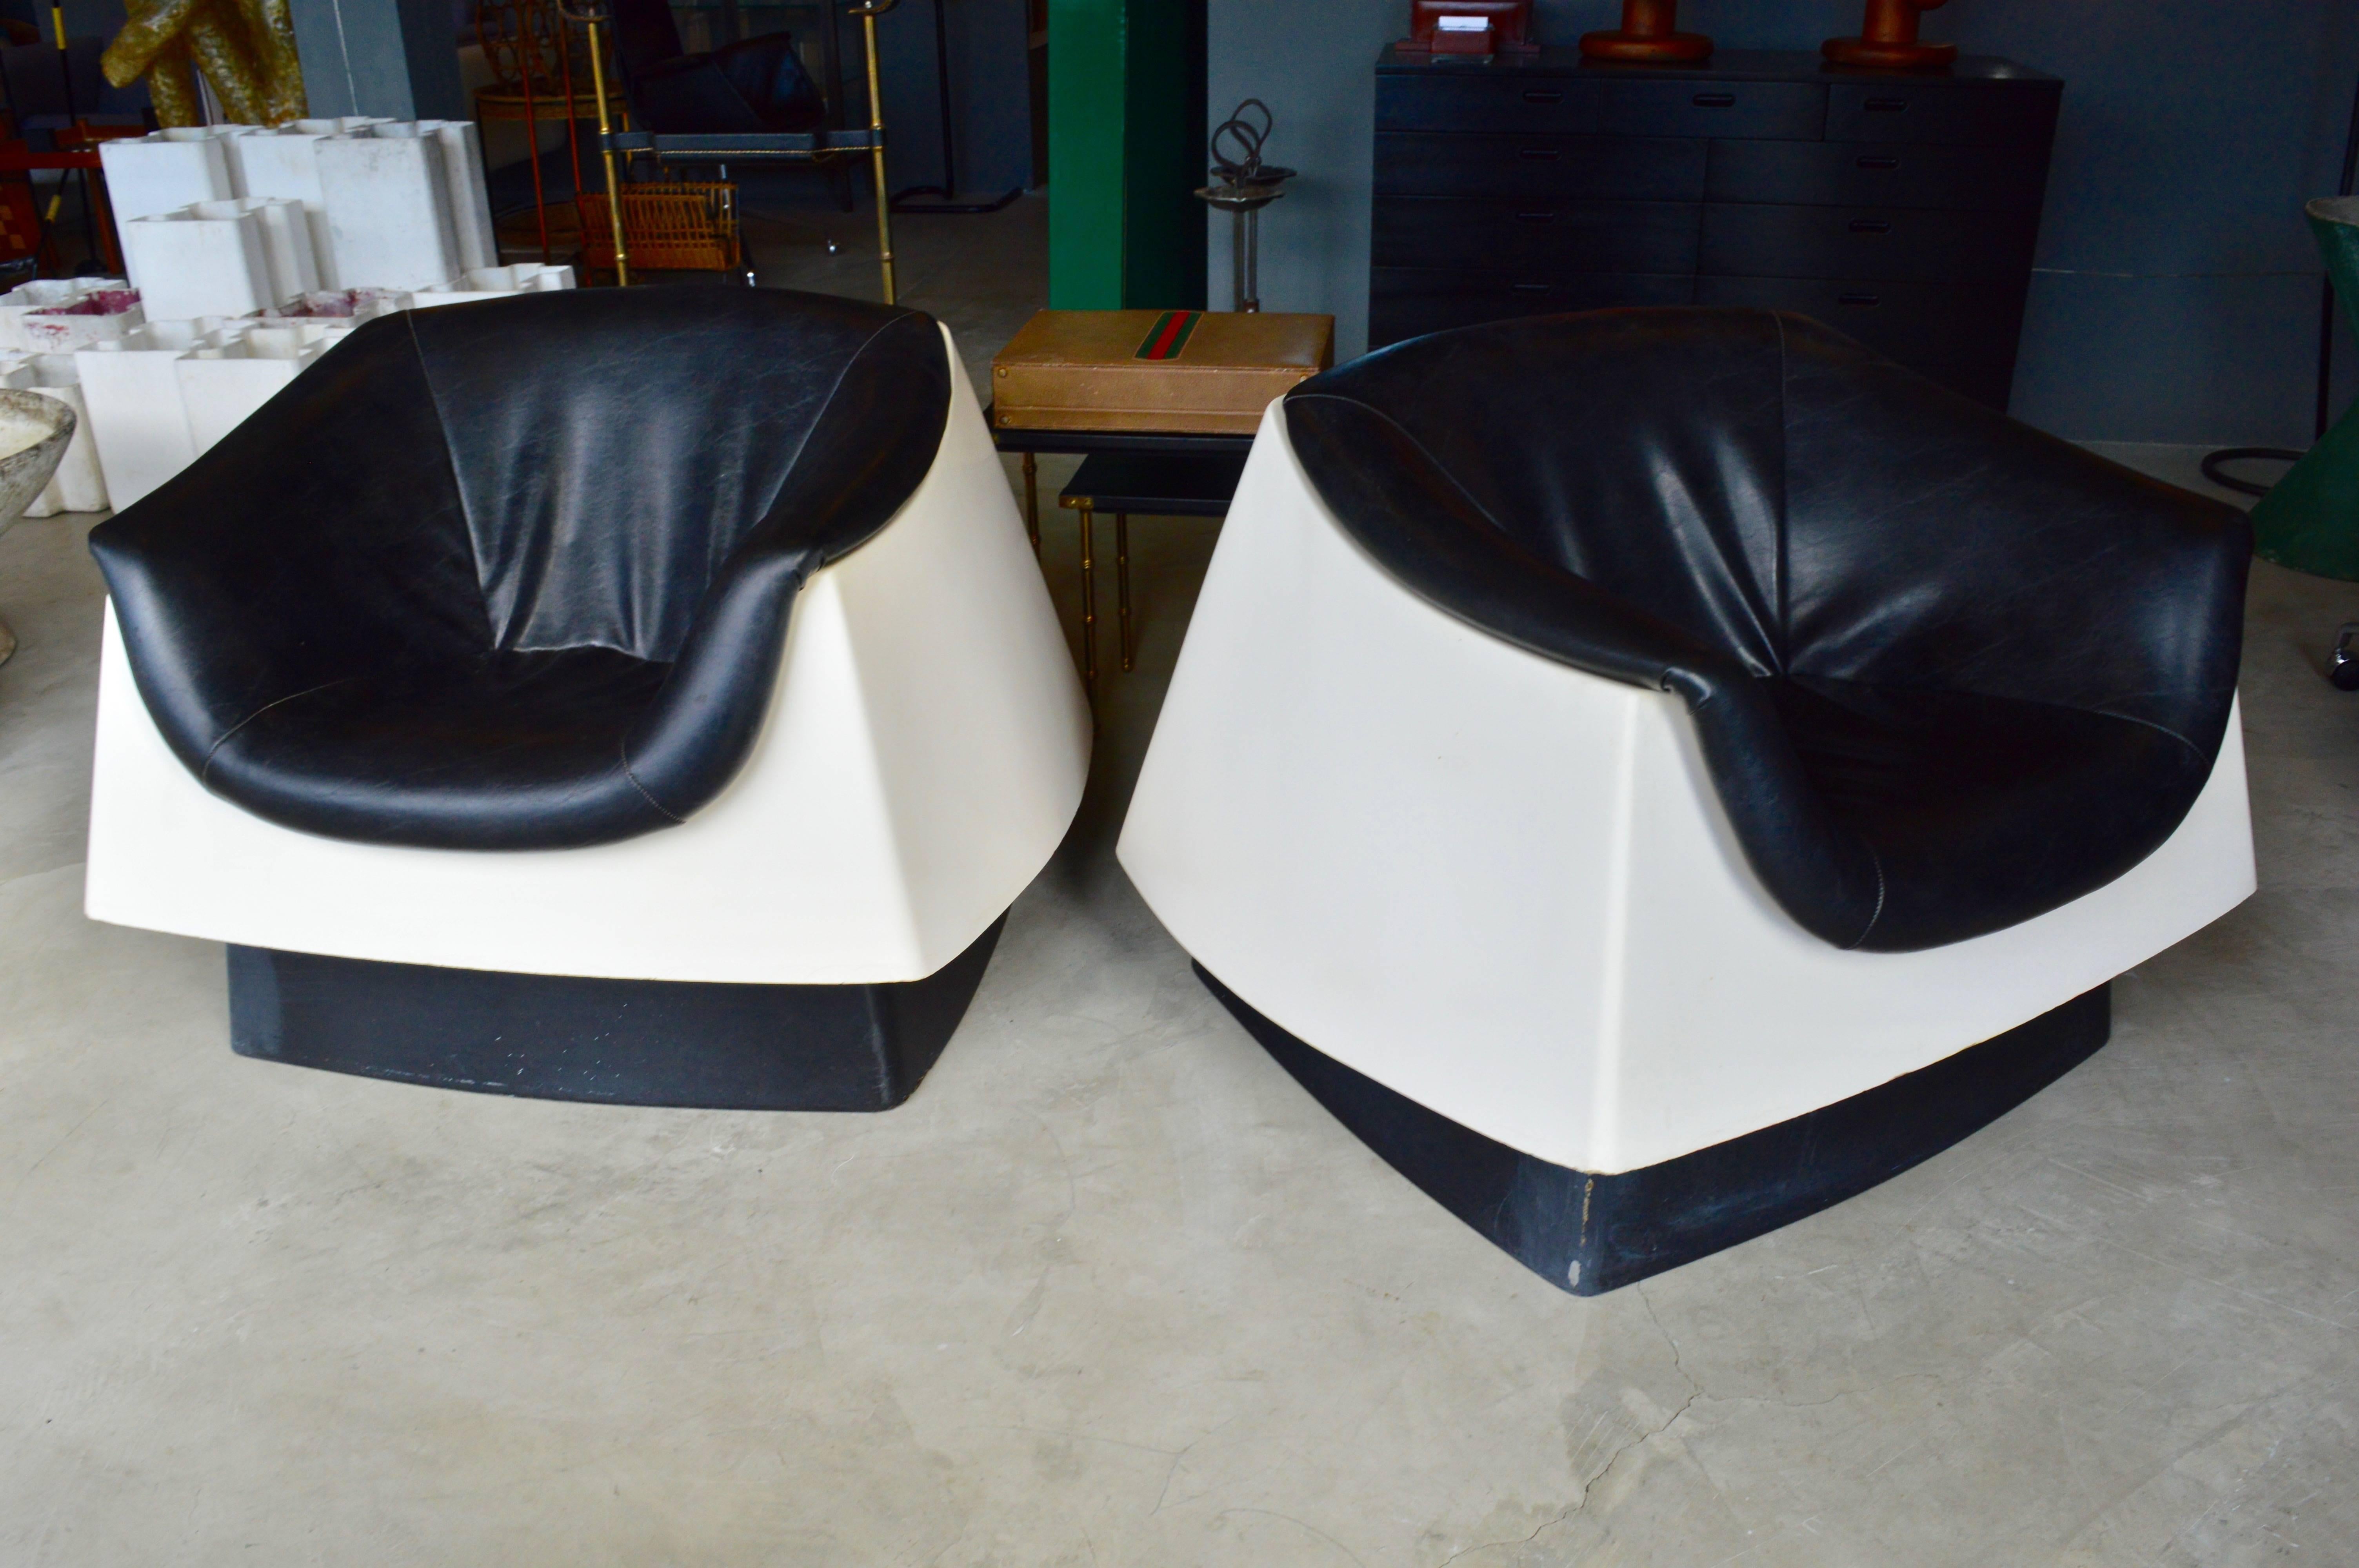 Handsome pair of sculptural fiberglass chairs in the style of Joe Colombo. Black base with white fiberglass chair. Original Skai seat covering. 

Very cool set of chairs. 

Great for indoors or outside.